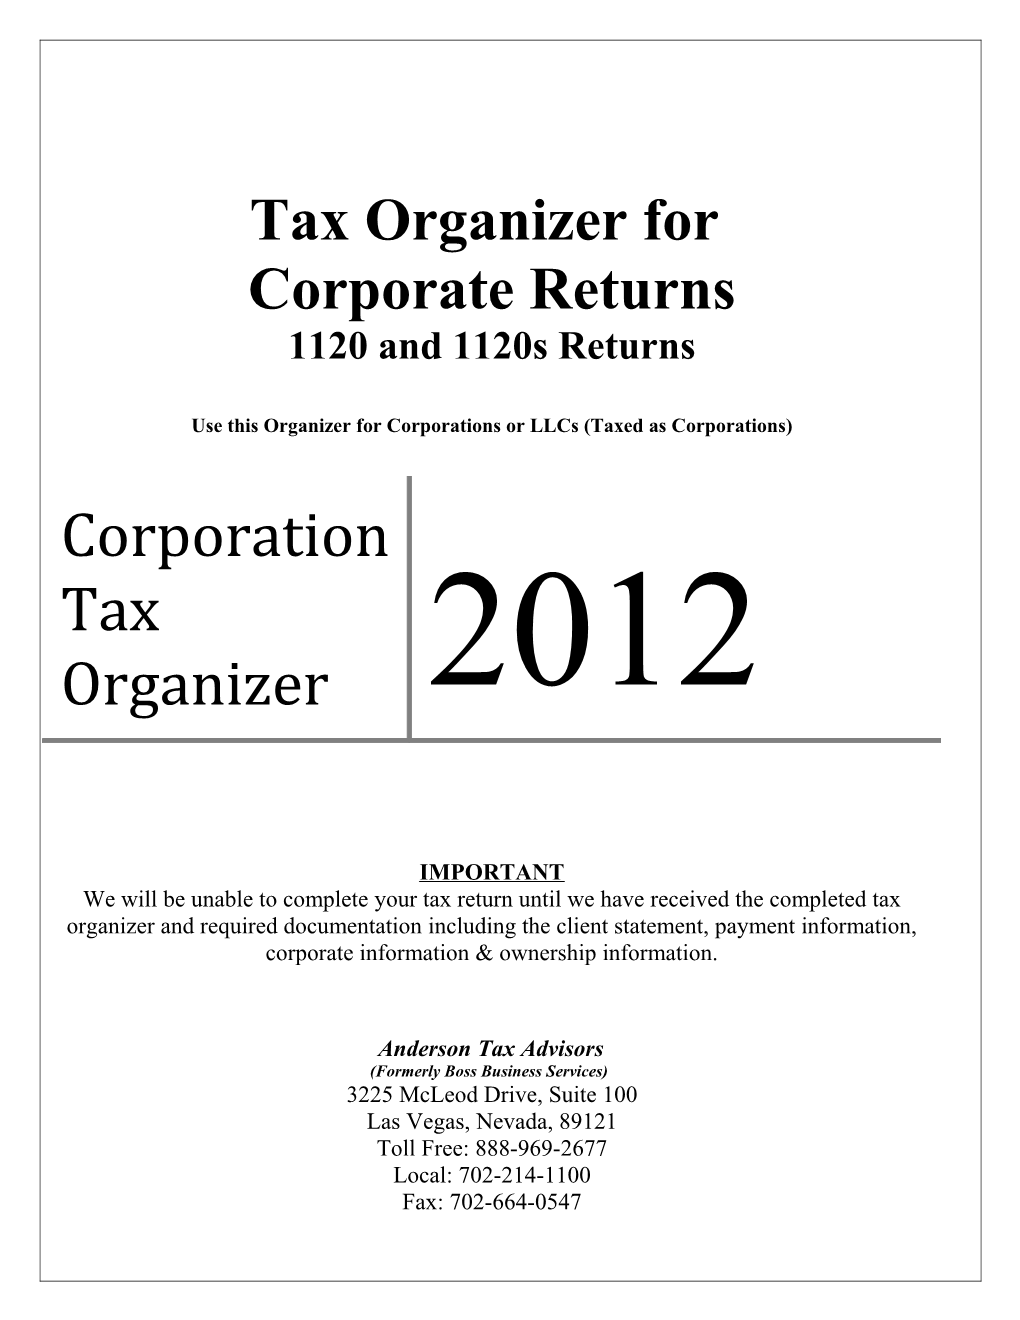 Use This Organizer for Corporations Or Llcs (Taxed As Corporations)